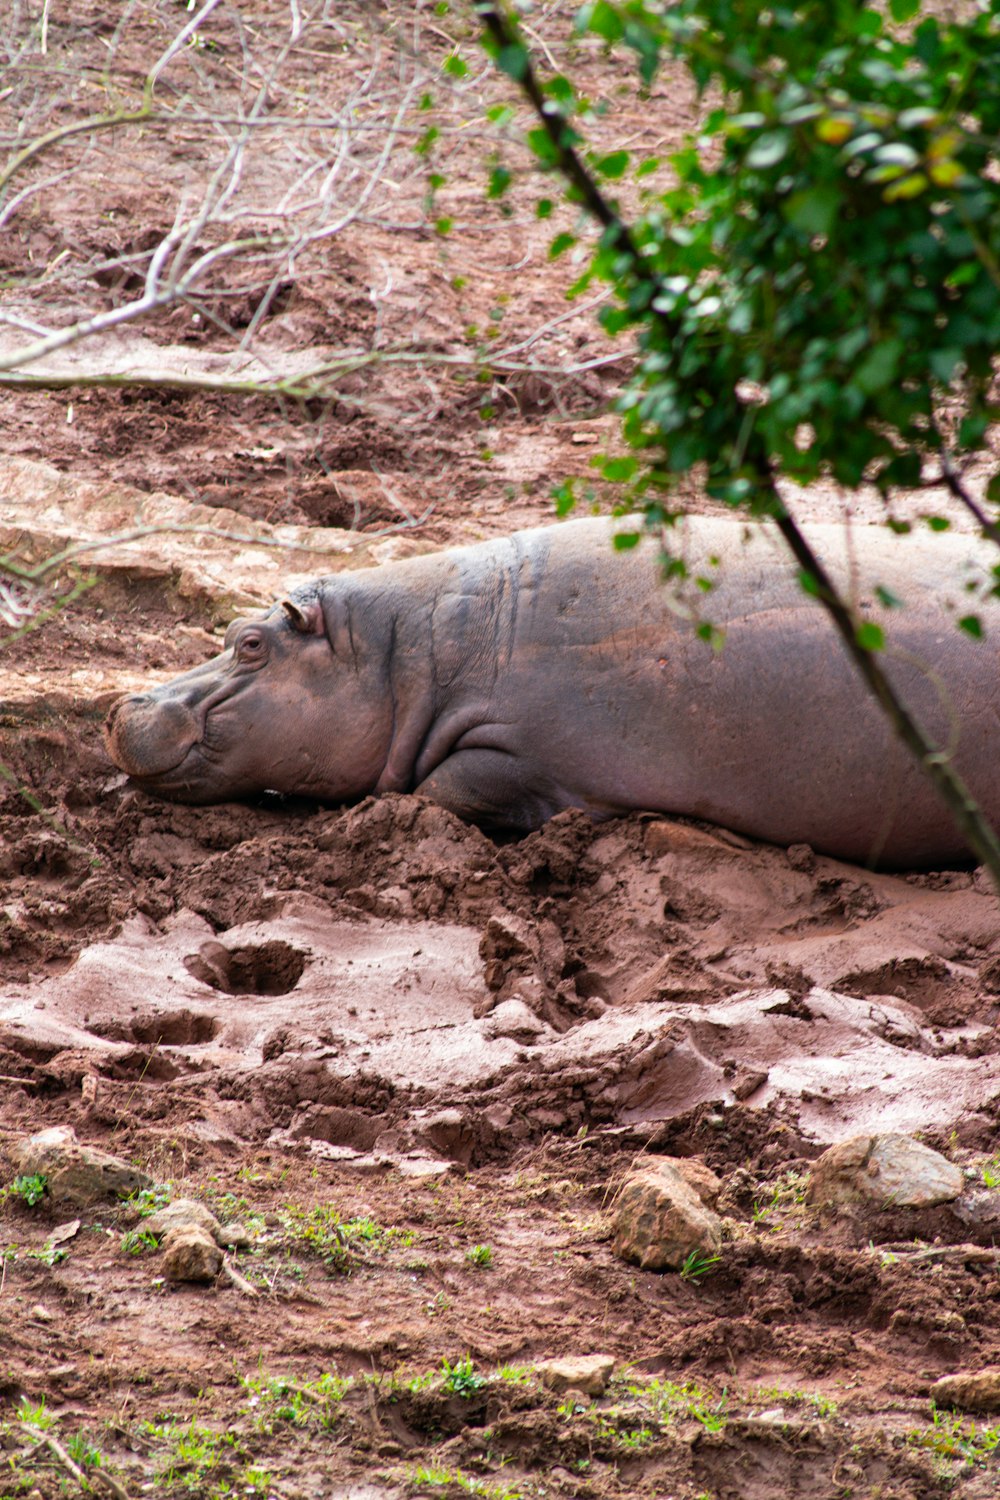 a hippopotamus laying on the ground in the mud